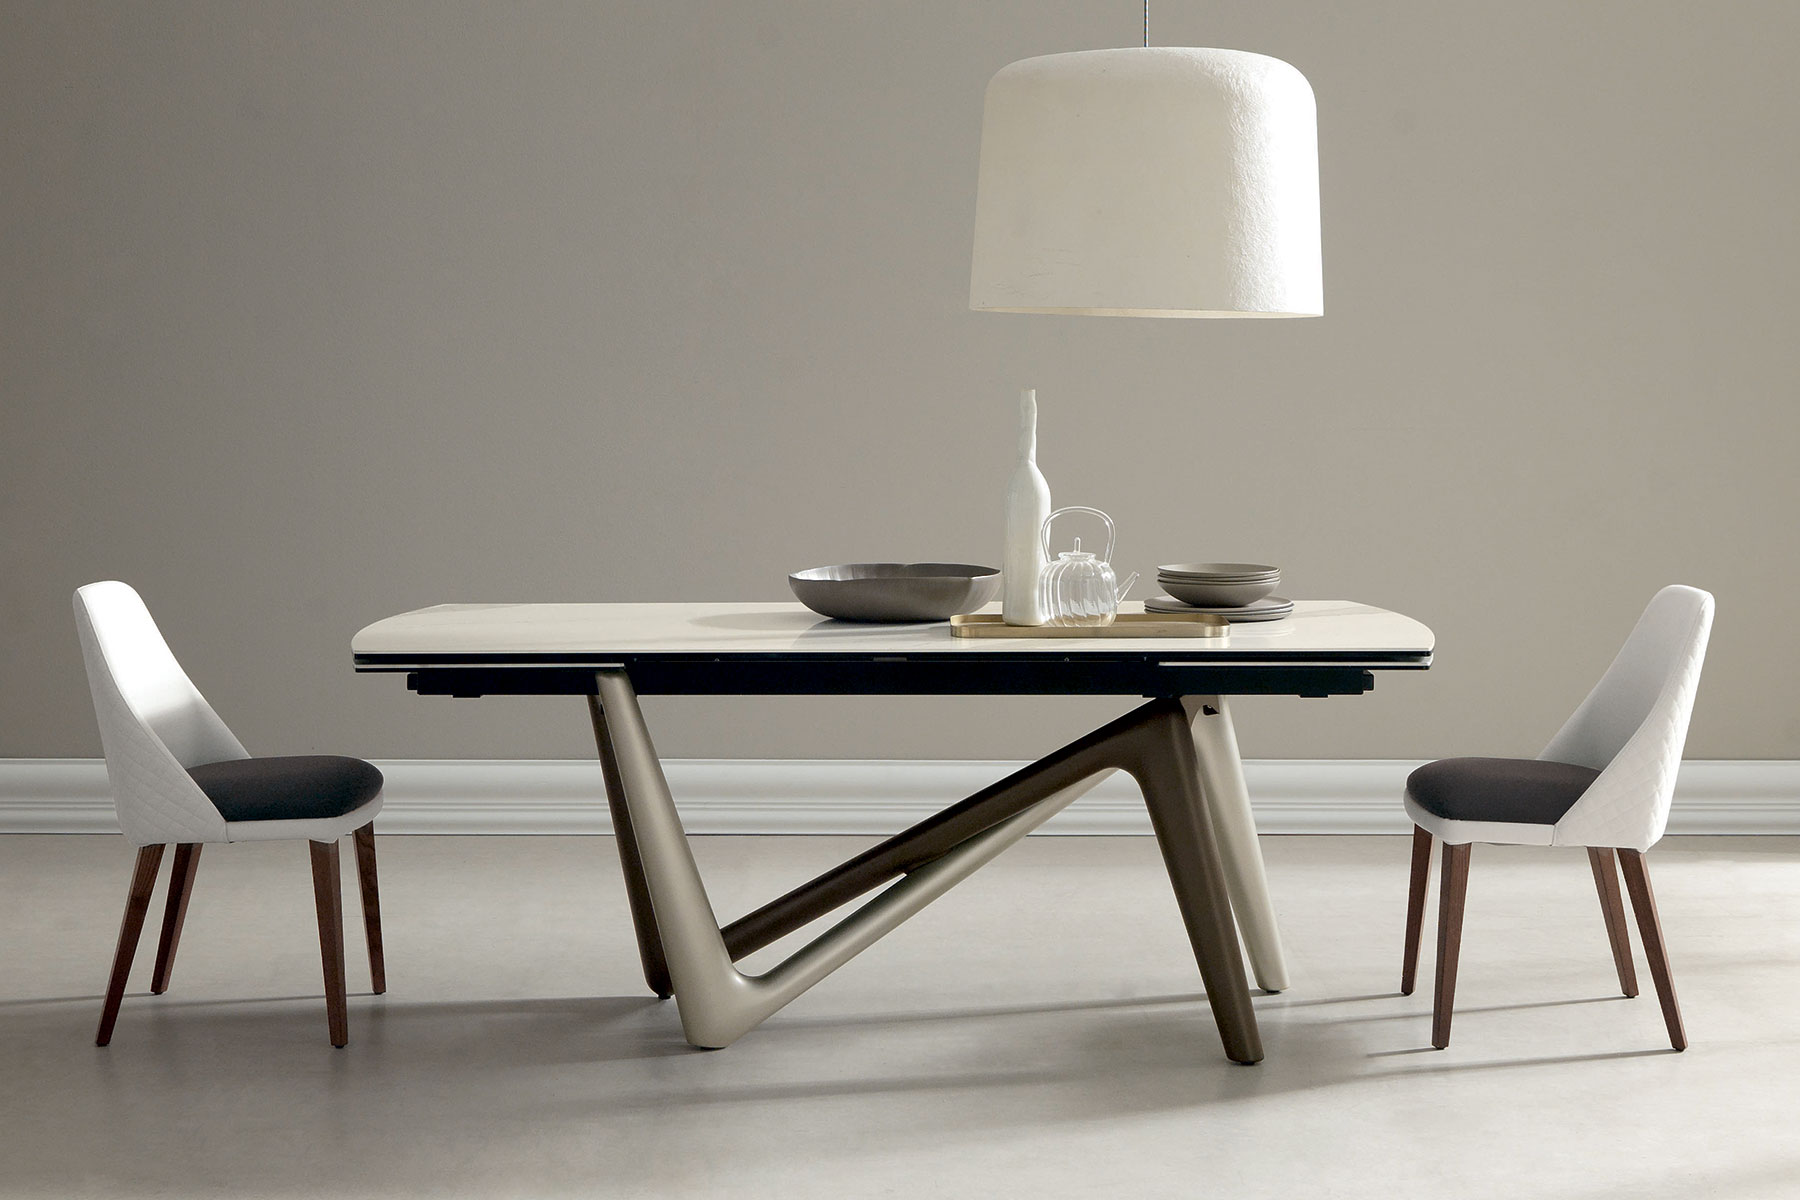 Andrea Lucatello designed a high-end ceramic extensible table, customizable in several finishing. Bicolor base, aluminium frame and barrel-shaped top.